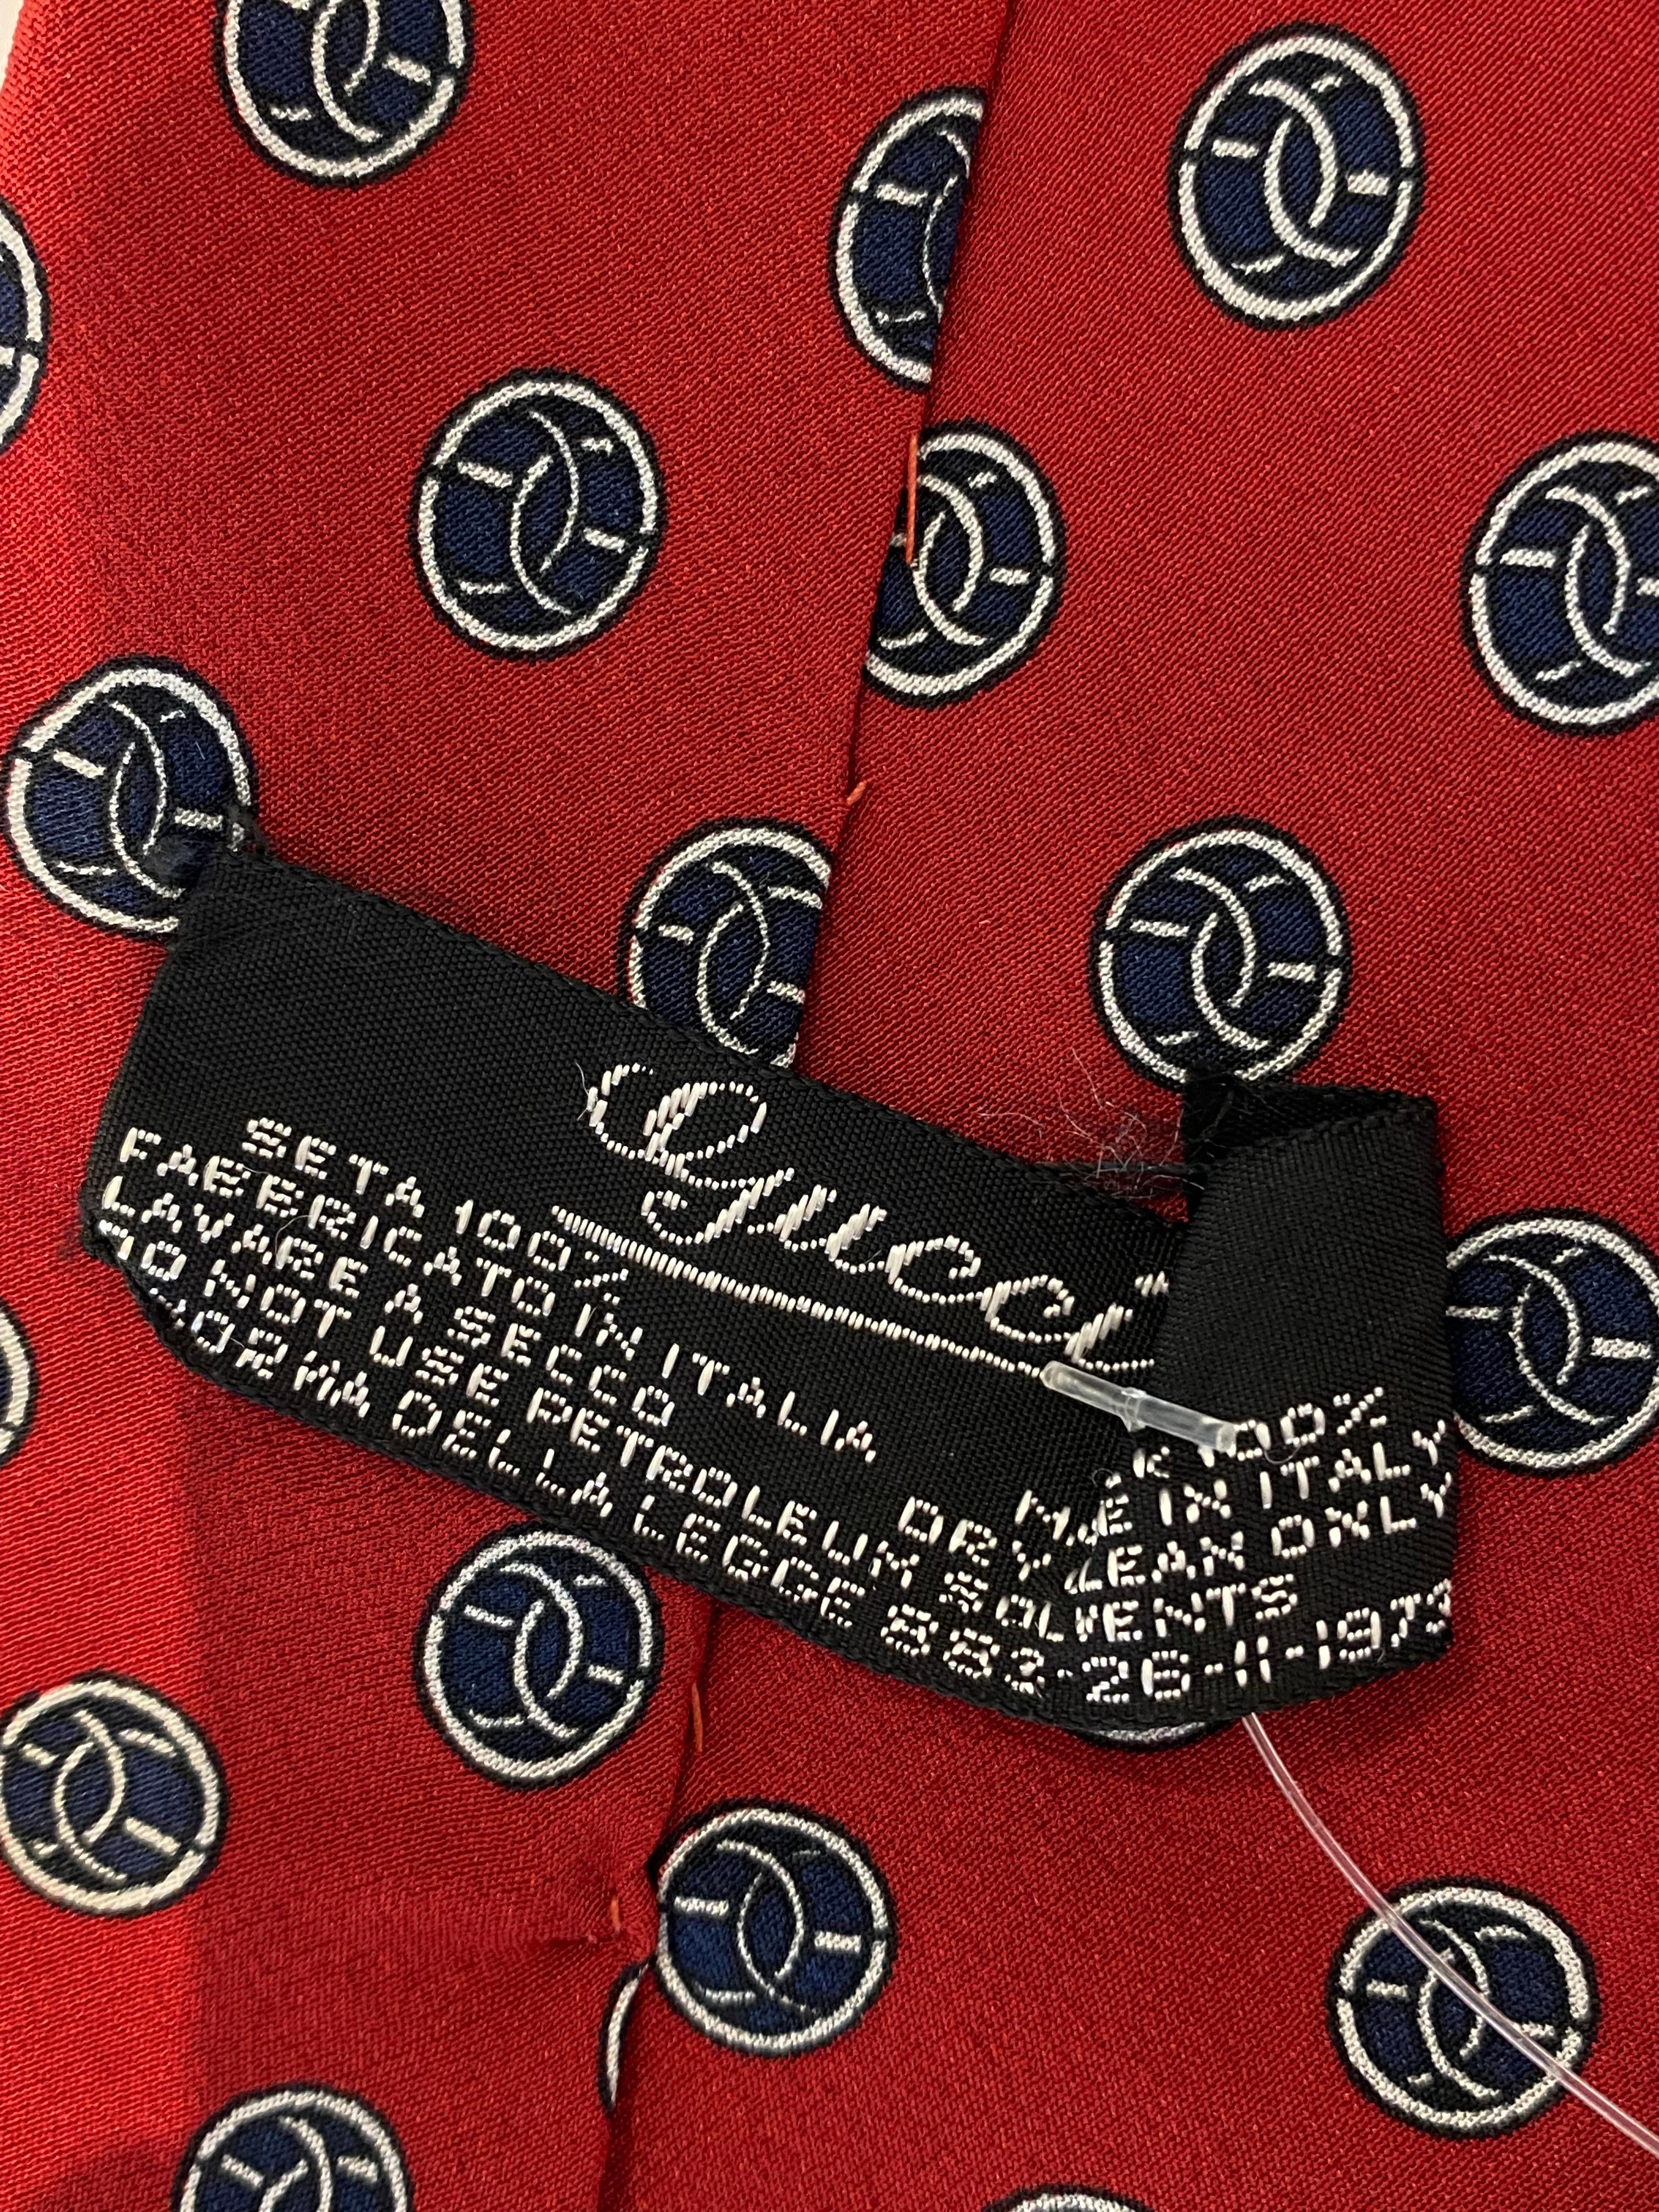 gucci tie red